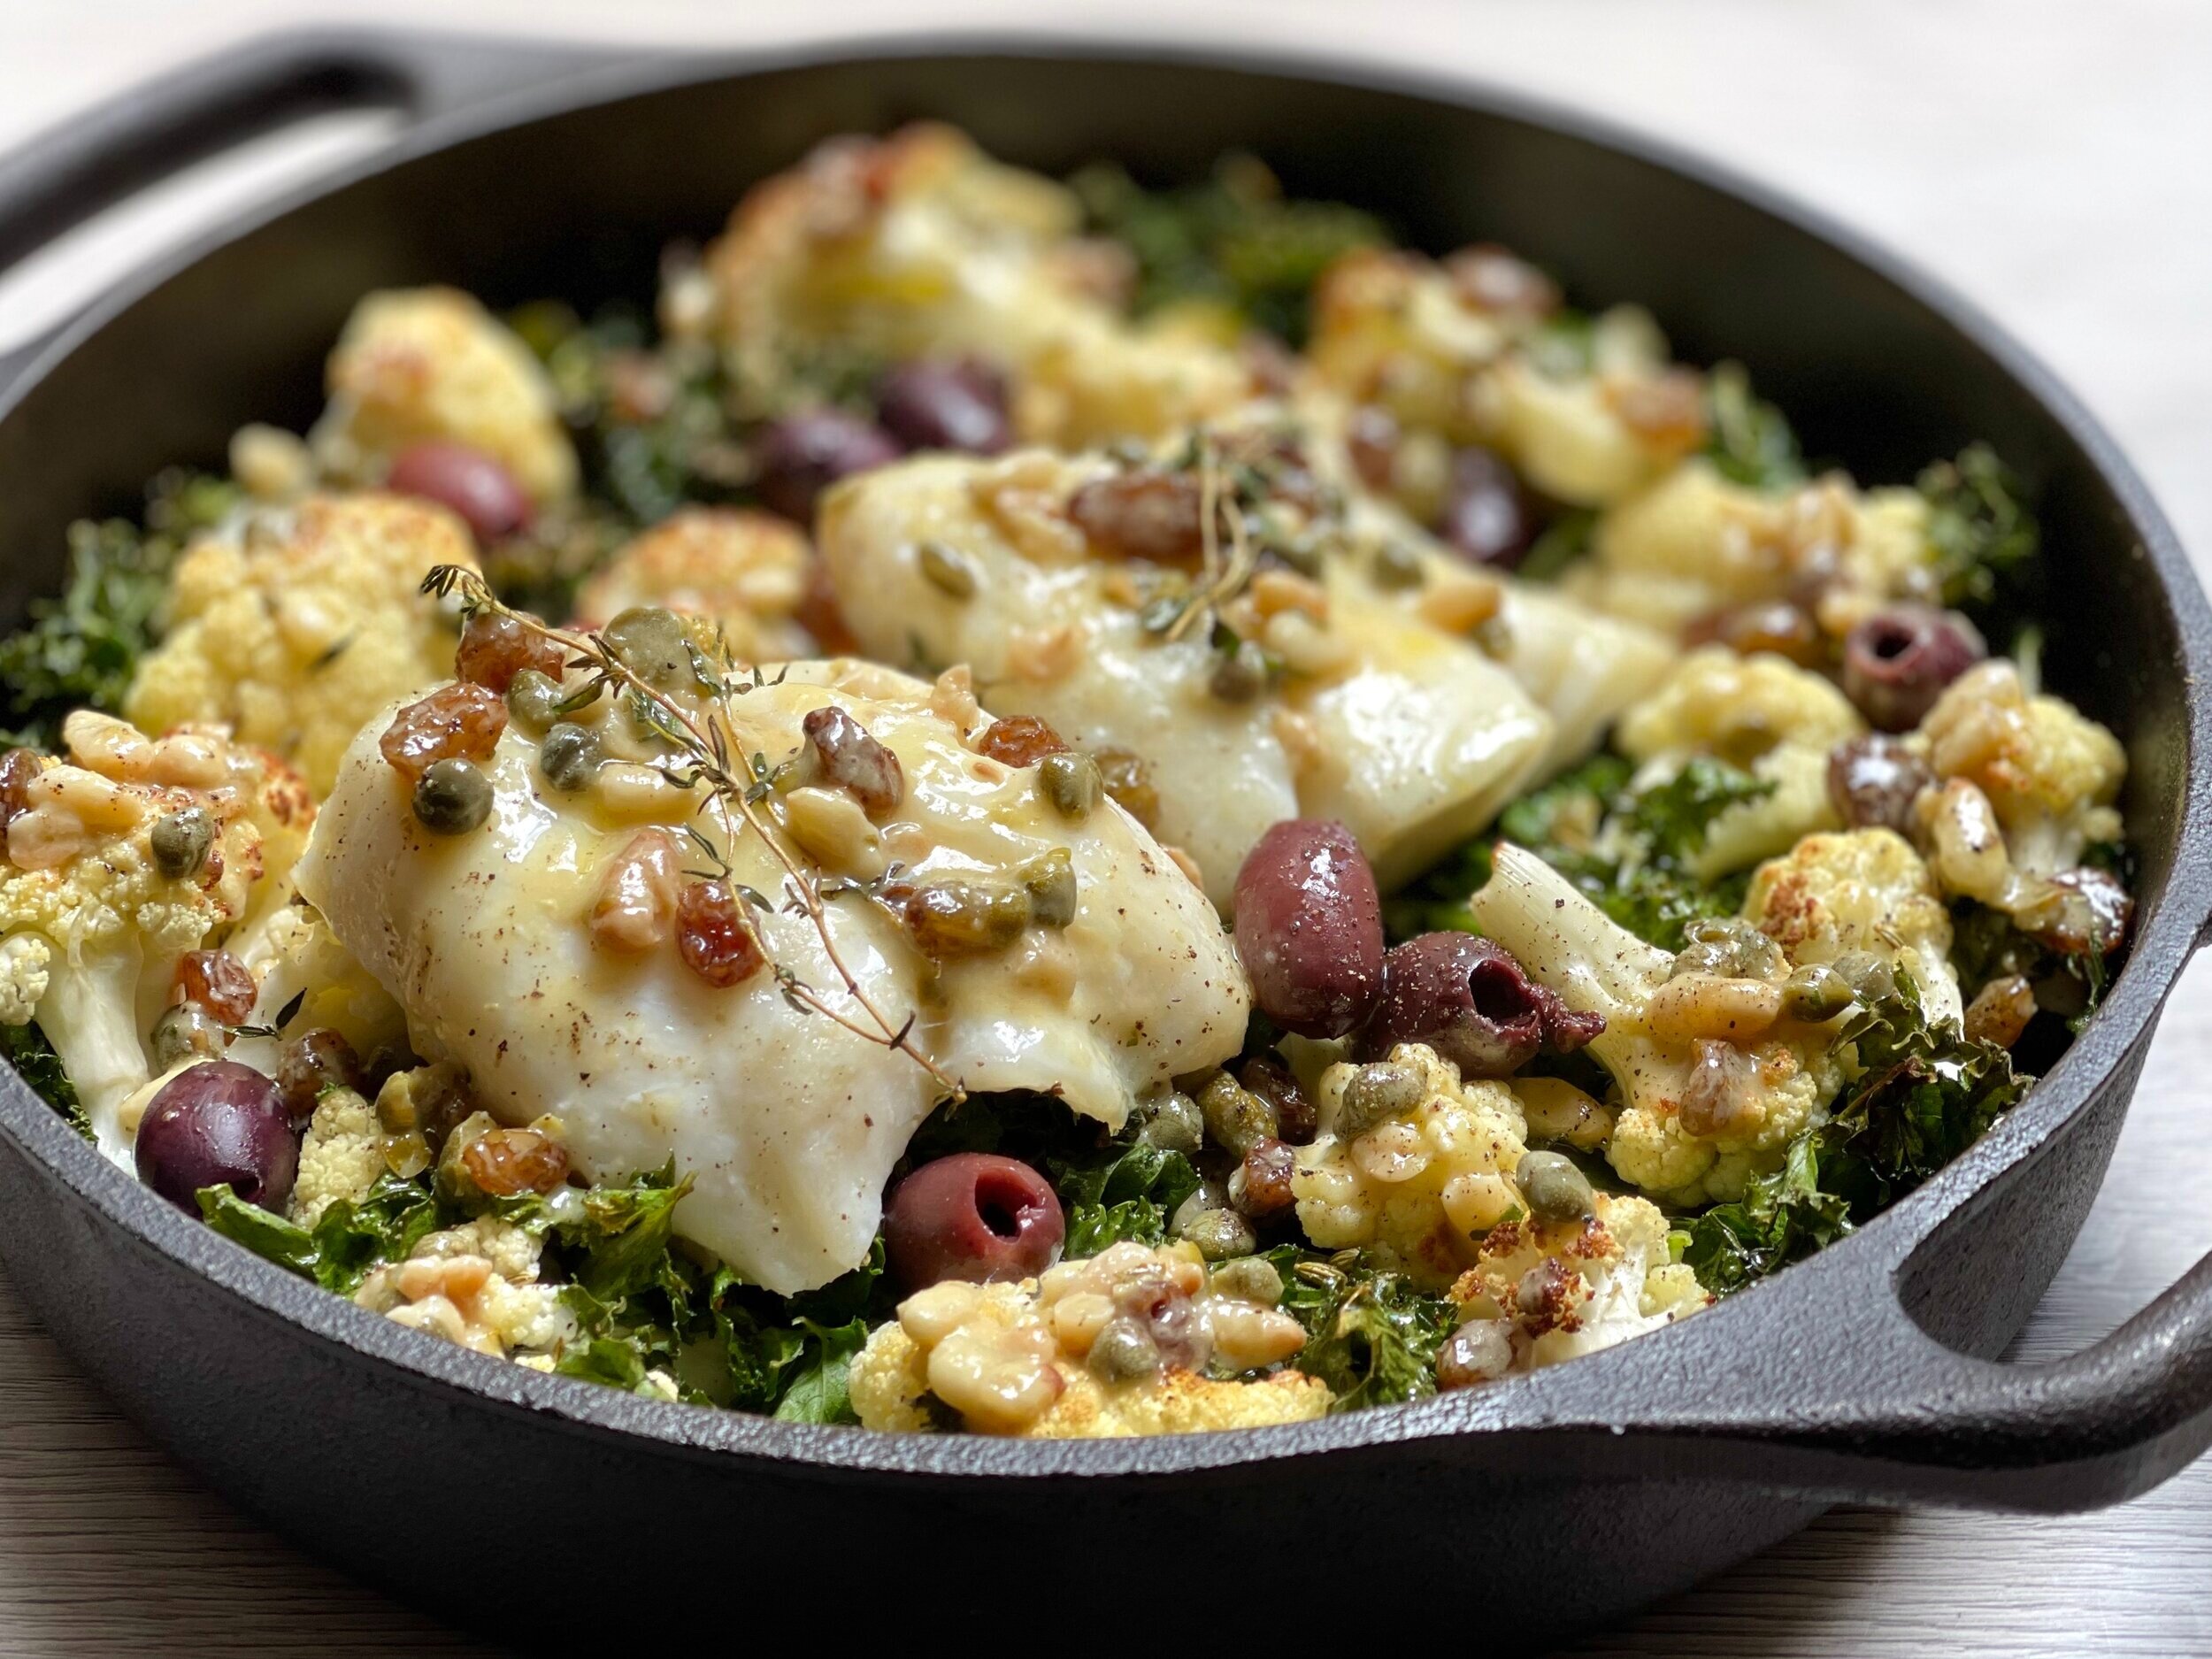 Roasted cod, cauliflower &amp; kale dressed with pine nut &amp; caper dressing